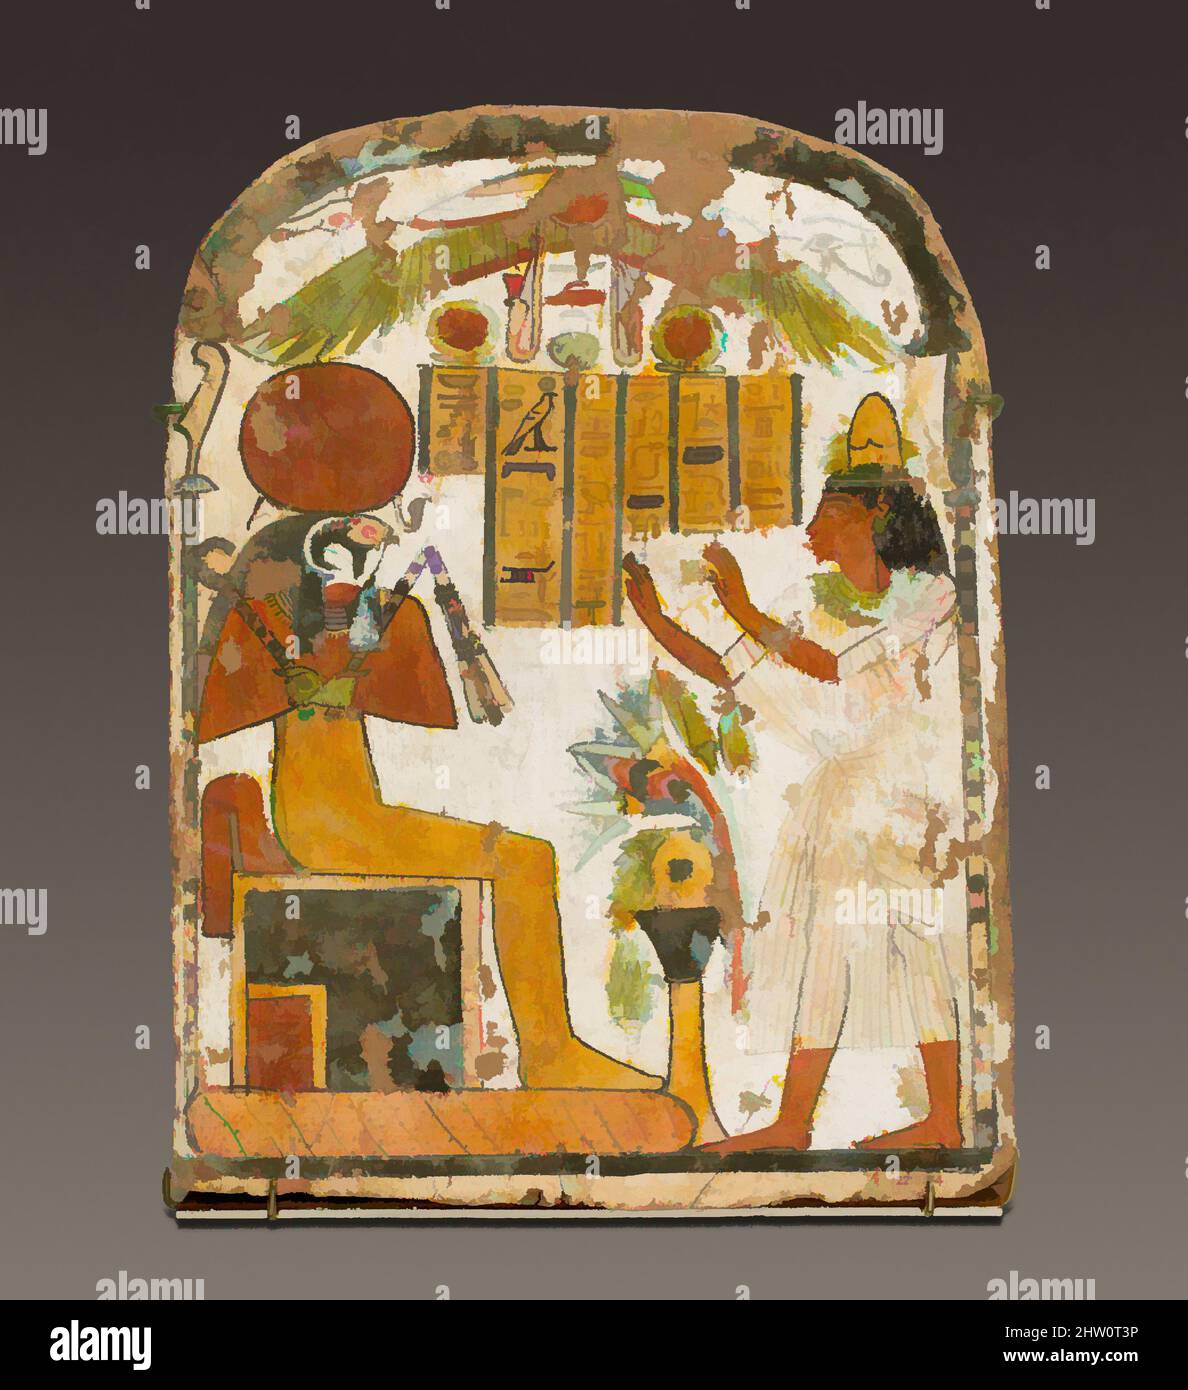 Art inspired by Painted stela of Djedbastet, Third Intermediate Period, Dynasty 22, ca. 825–712 B.C., From Egypt, Upper Egypt, Thebes, Deir el-Bahri, Tomb, 1921–22, Wood, gesso, paint, H. 29.3 cm, This stela is one of four found near the doorway of a brick chapel built during the 22nd, Classic works modernized by Artotop with a splash of modernity. Shapes, color and value, eye-catching visual impact on art. Emotions through freedom of artworks in a contemporary way. A timeless message pursuing a wildly creative new direction. Artists turning to the digital medium and creating the Artotop NFT Stock Photo